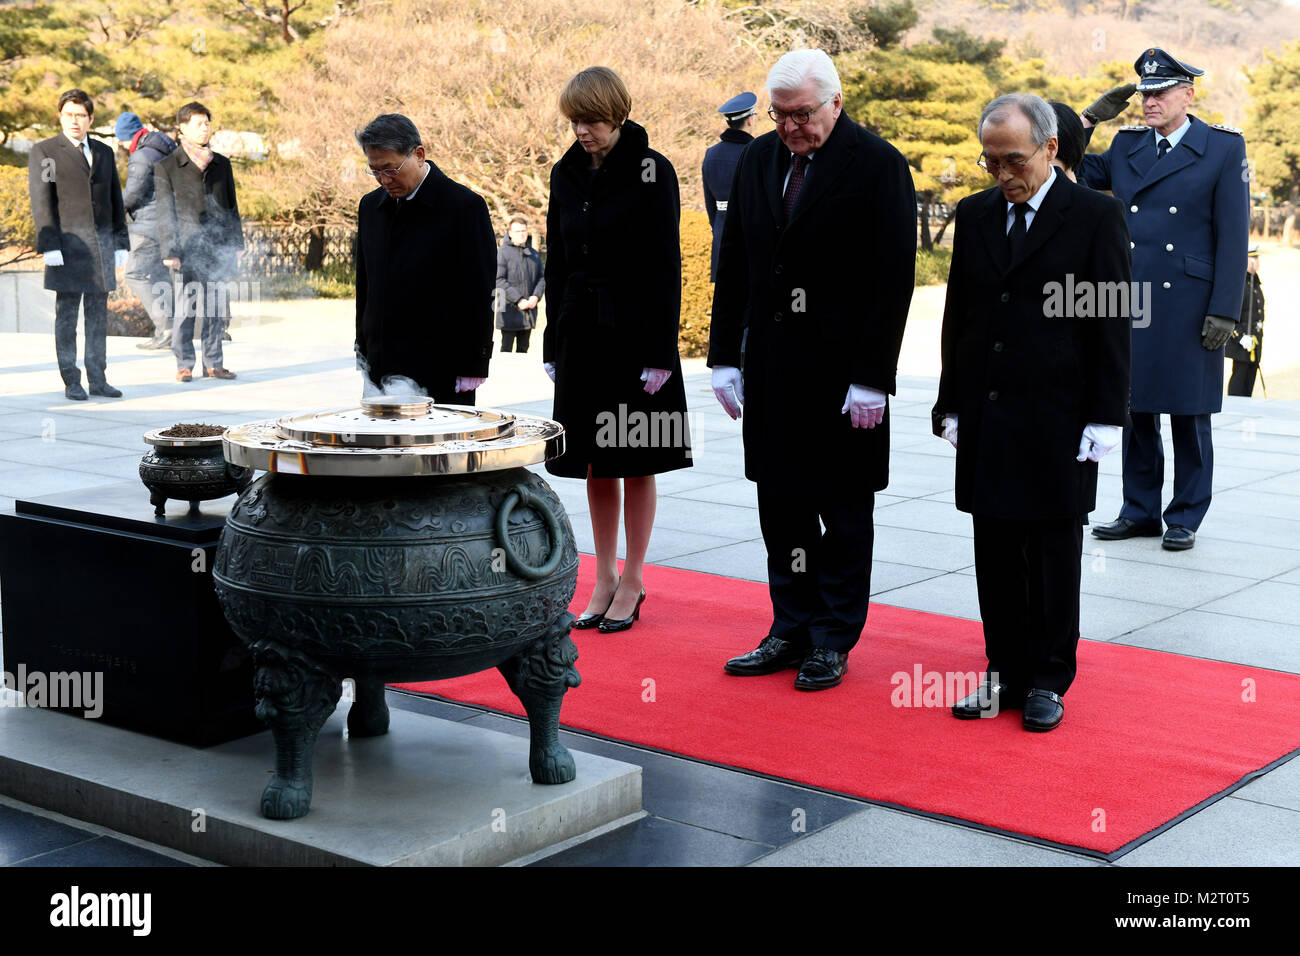 Seoul, South Korea. 08th Feb, 2018. German President Frank-Walter Steinmeier and his wife Elke Buedenbender, along with the director of South Korea's Council of National Monuments, Su-Hyun An, and the monument's director, Gyeong-Sik Heo (L), honouring South Korea's fallen by burning incense in the National Cemetery in Seoul, South Korea, 08 February 2018. Credit: Maurizio Gambarini/dpa/Alamy Live News Stock Photo